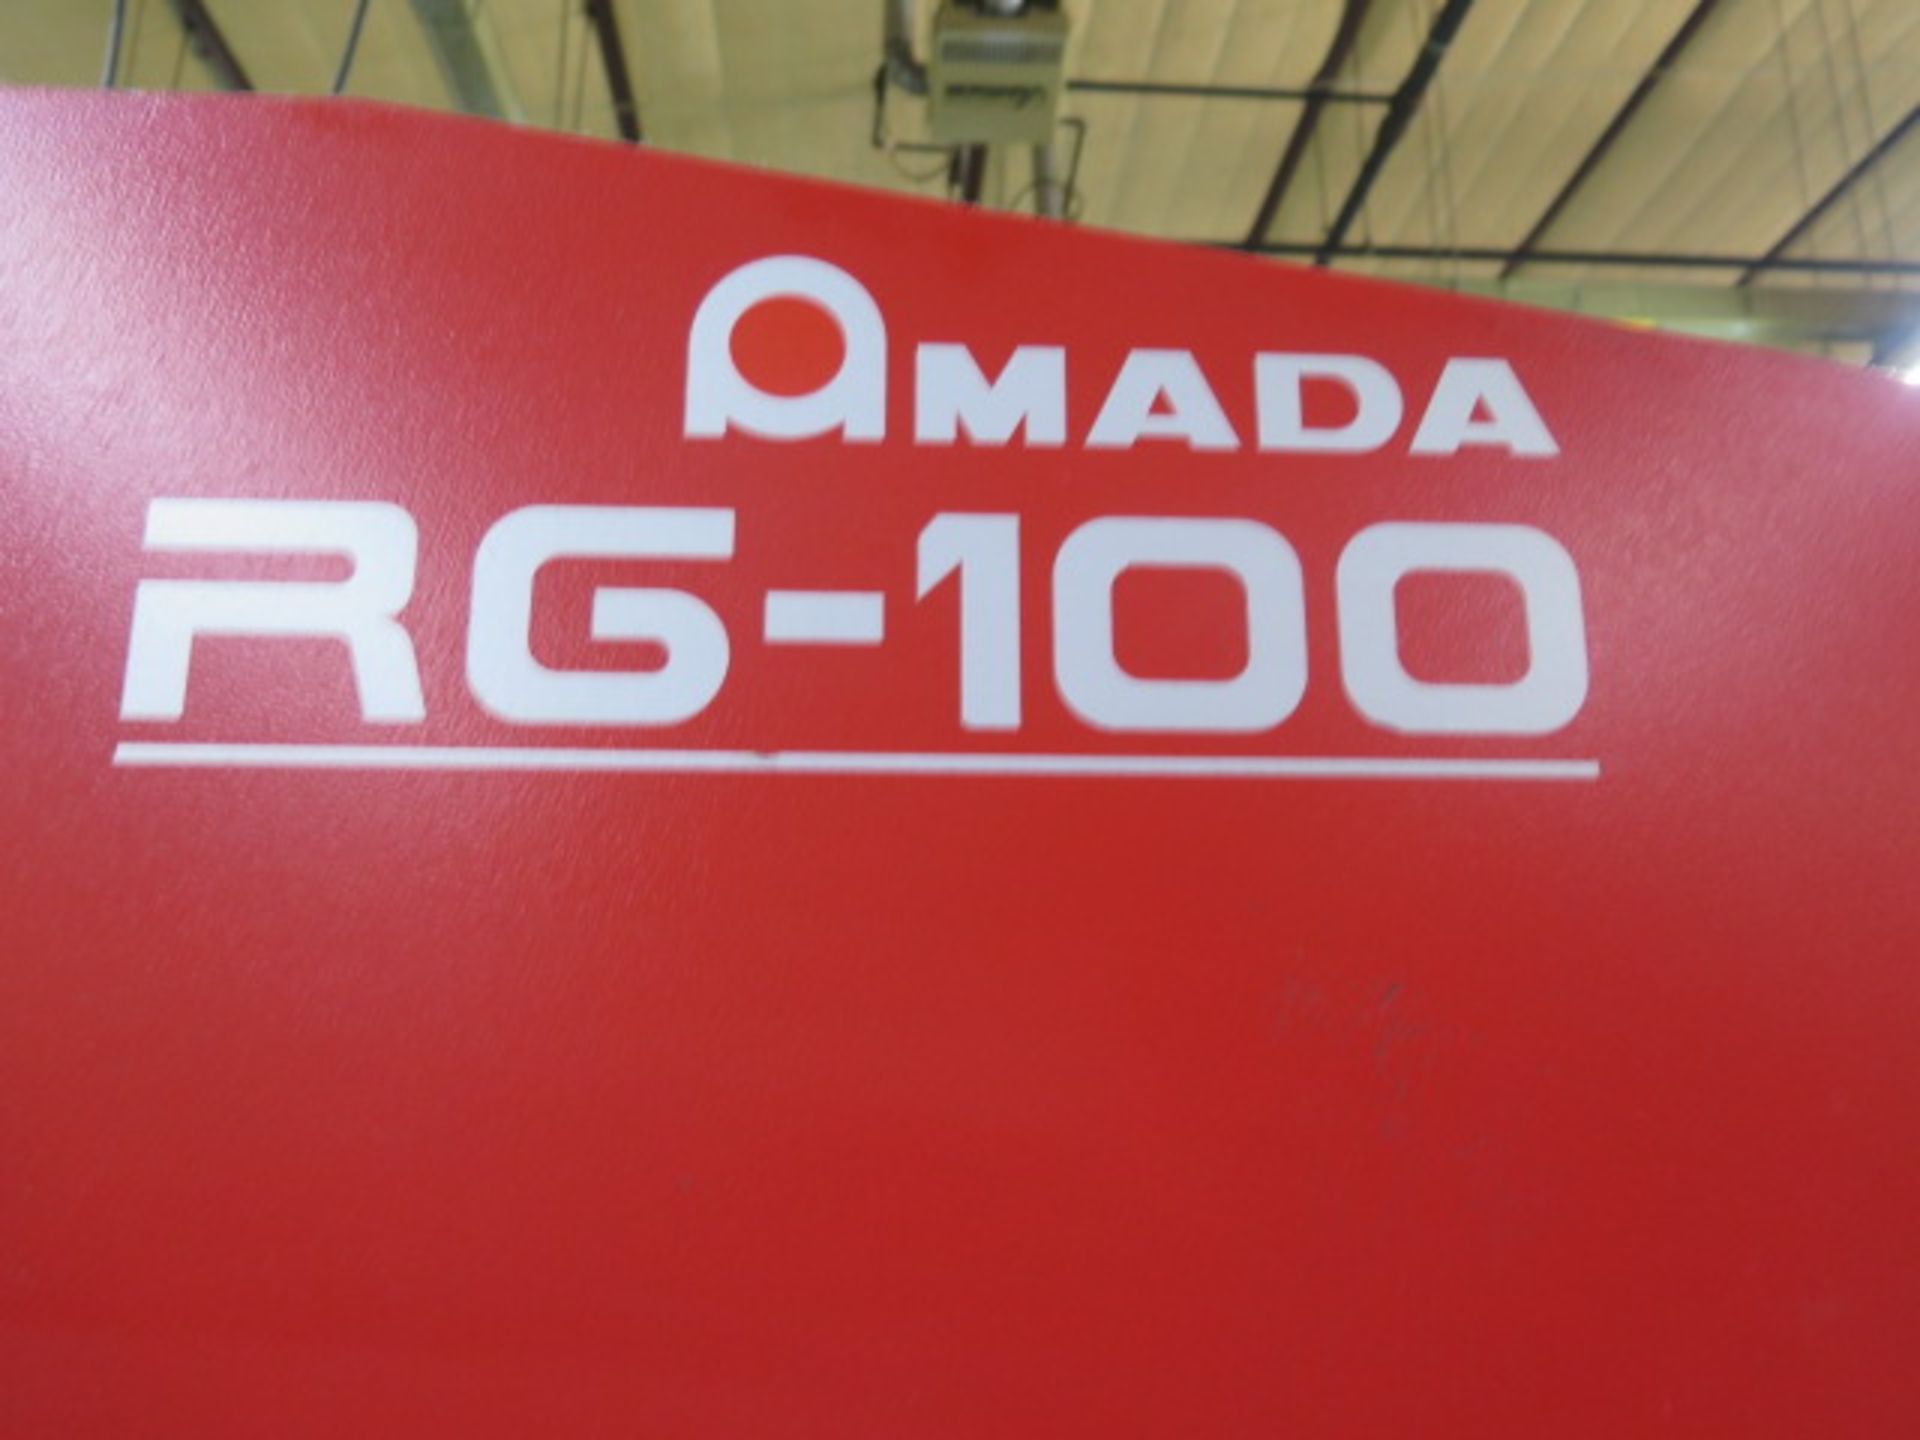 Amada RG100 100 Ton x 10’ CNC Press Brake s/n 105240 w/ NC9-EX II 3 AXIS Controls, SOLD AS IS - Image 13 of 20